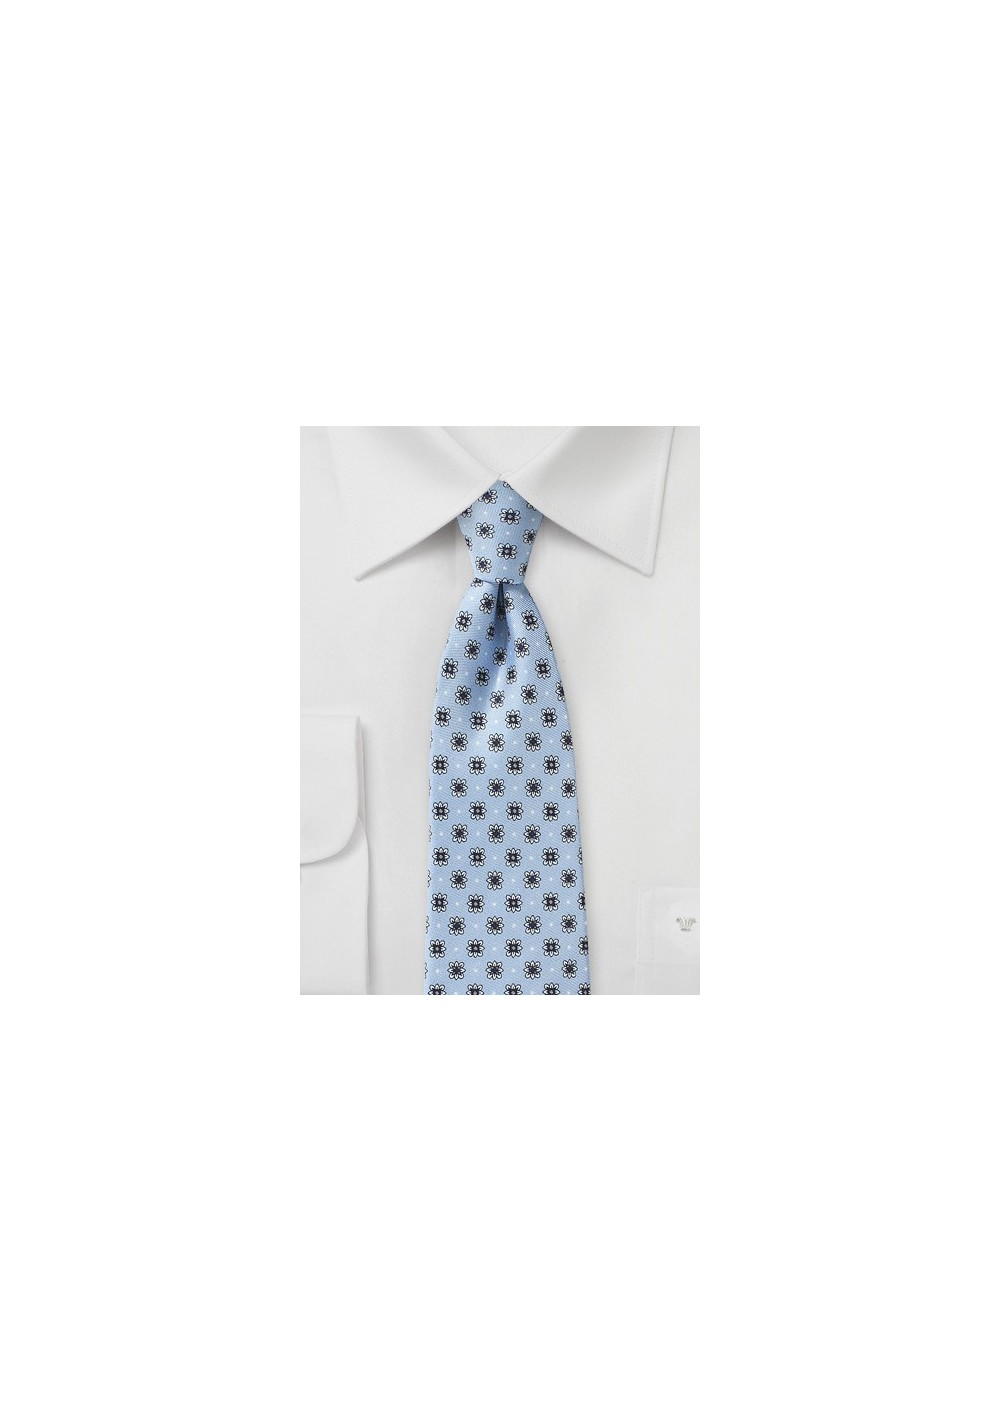 Powder Blue and Silver Floral Tie